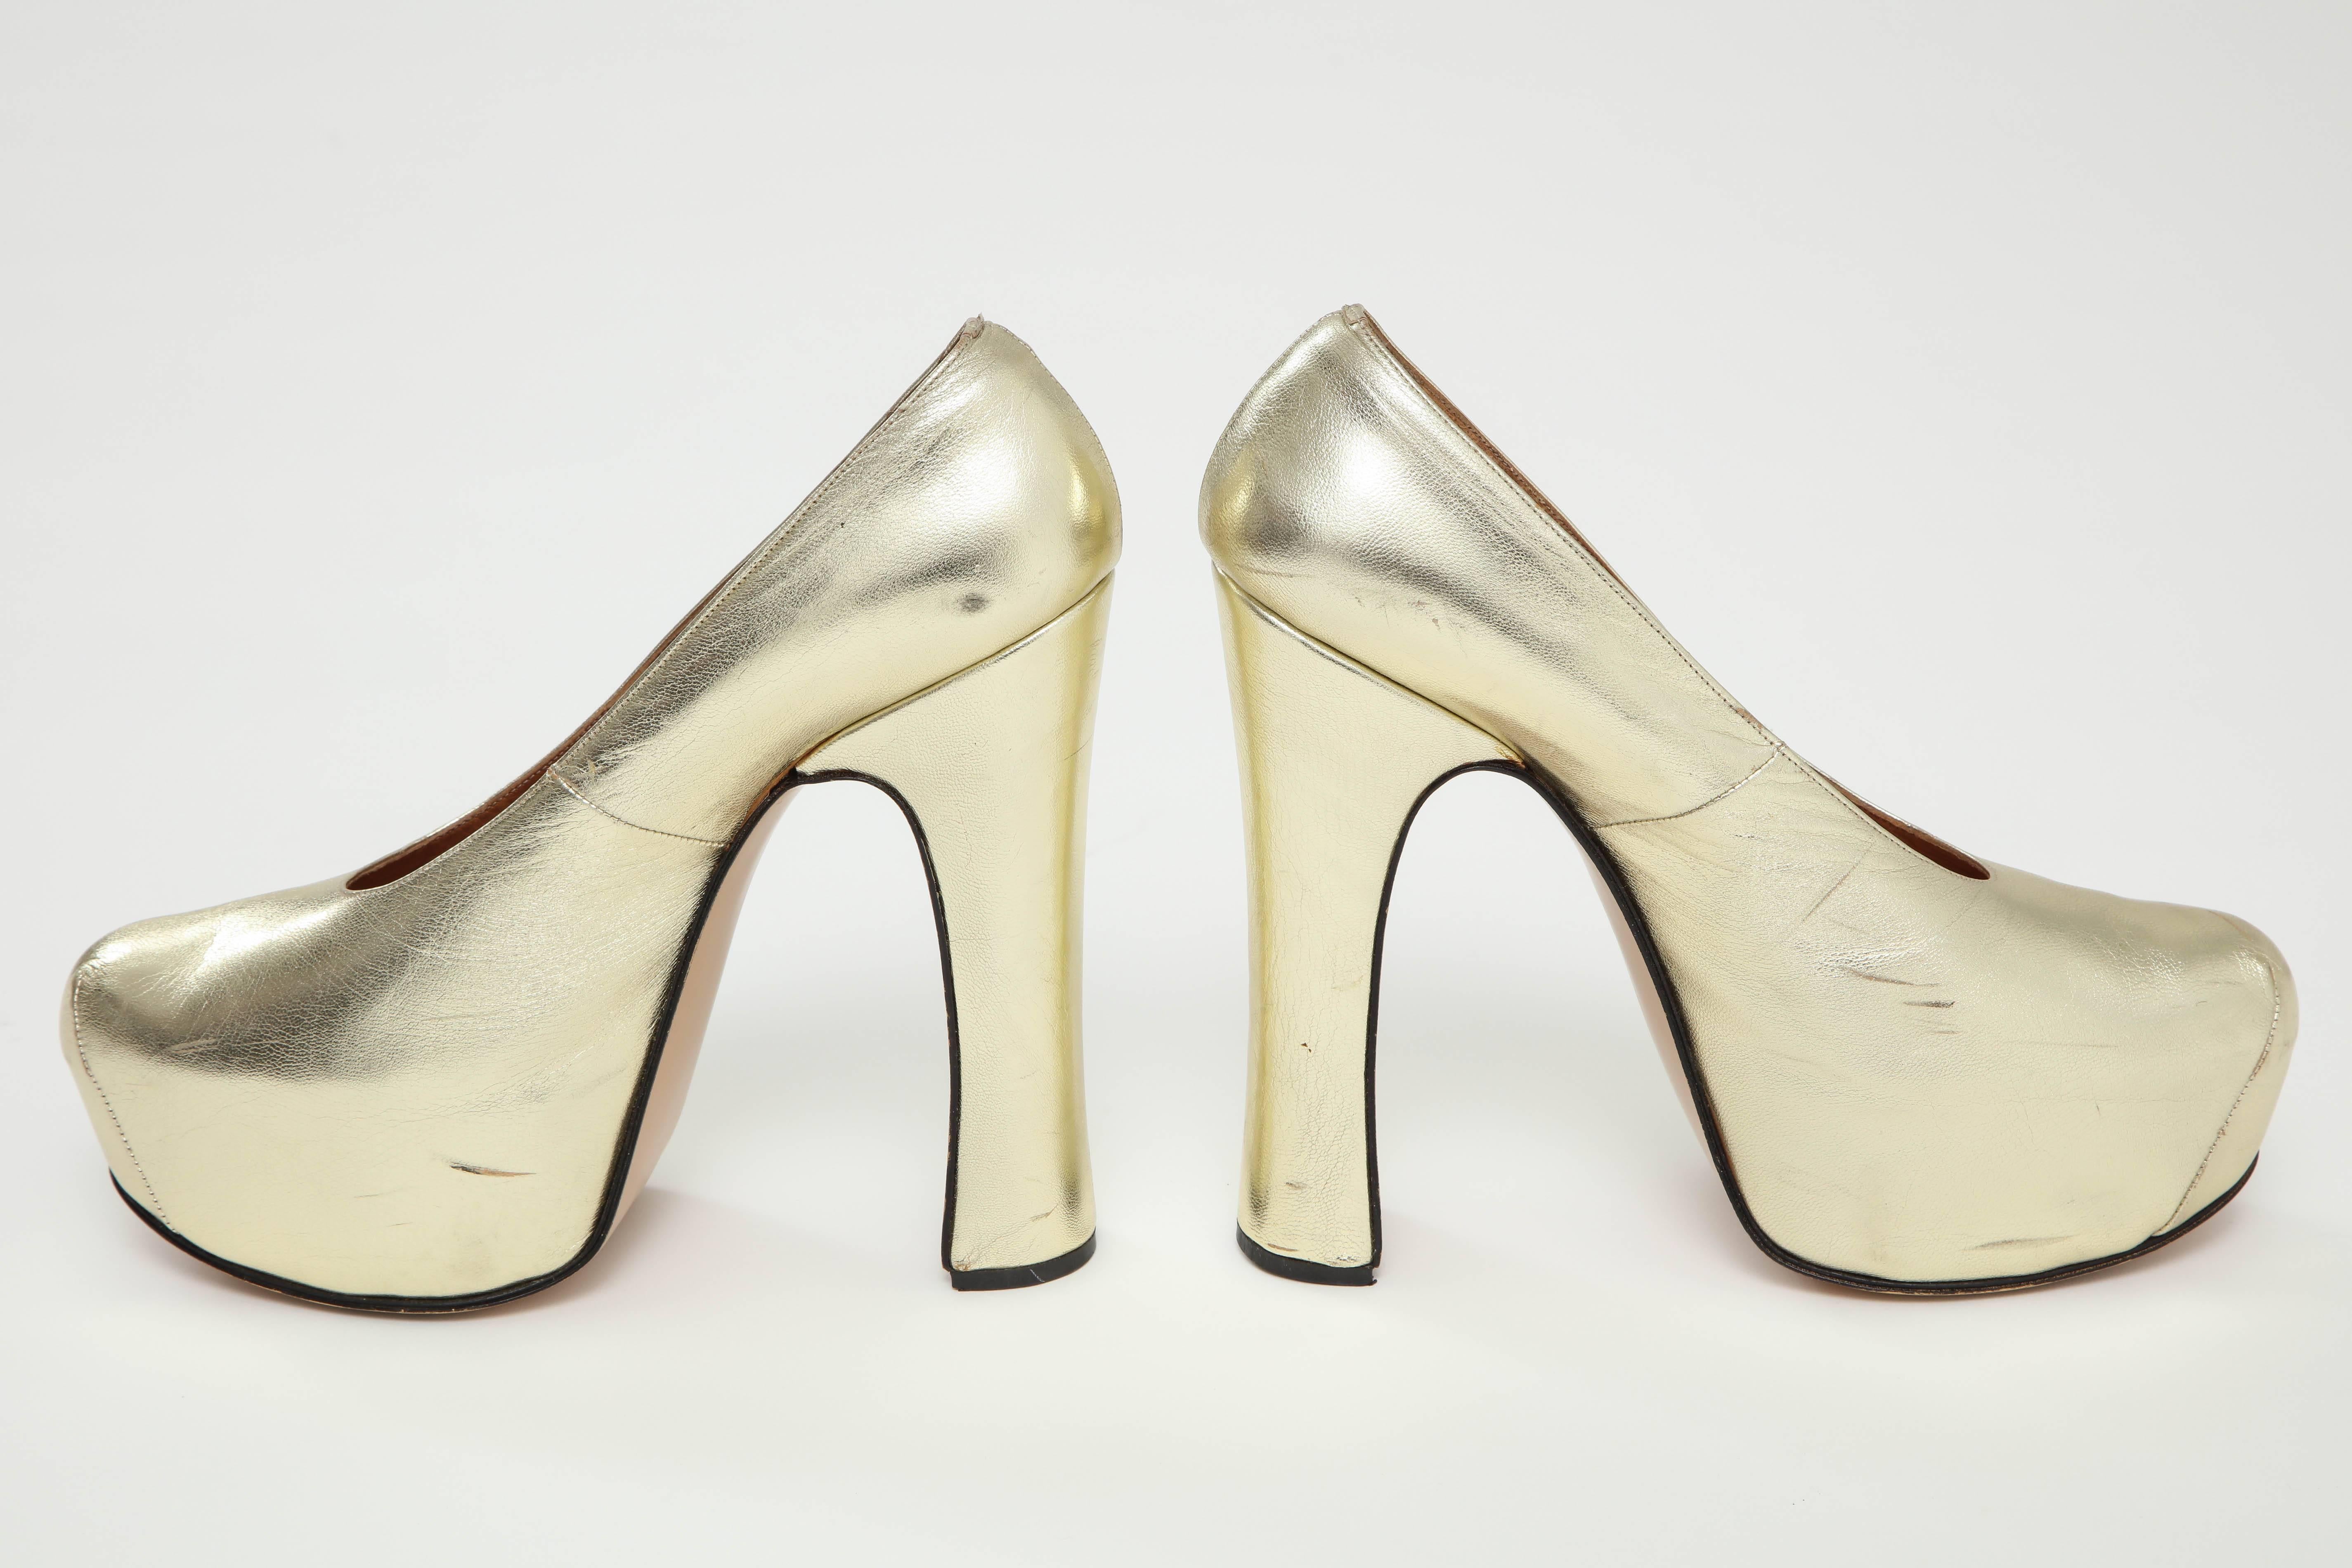 Iconic Rare Pair of Vivienne Westwood Shoes In Good Condition For Sale In New York, NY